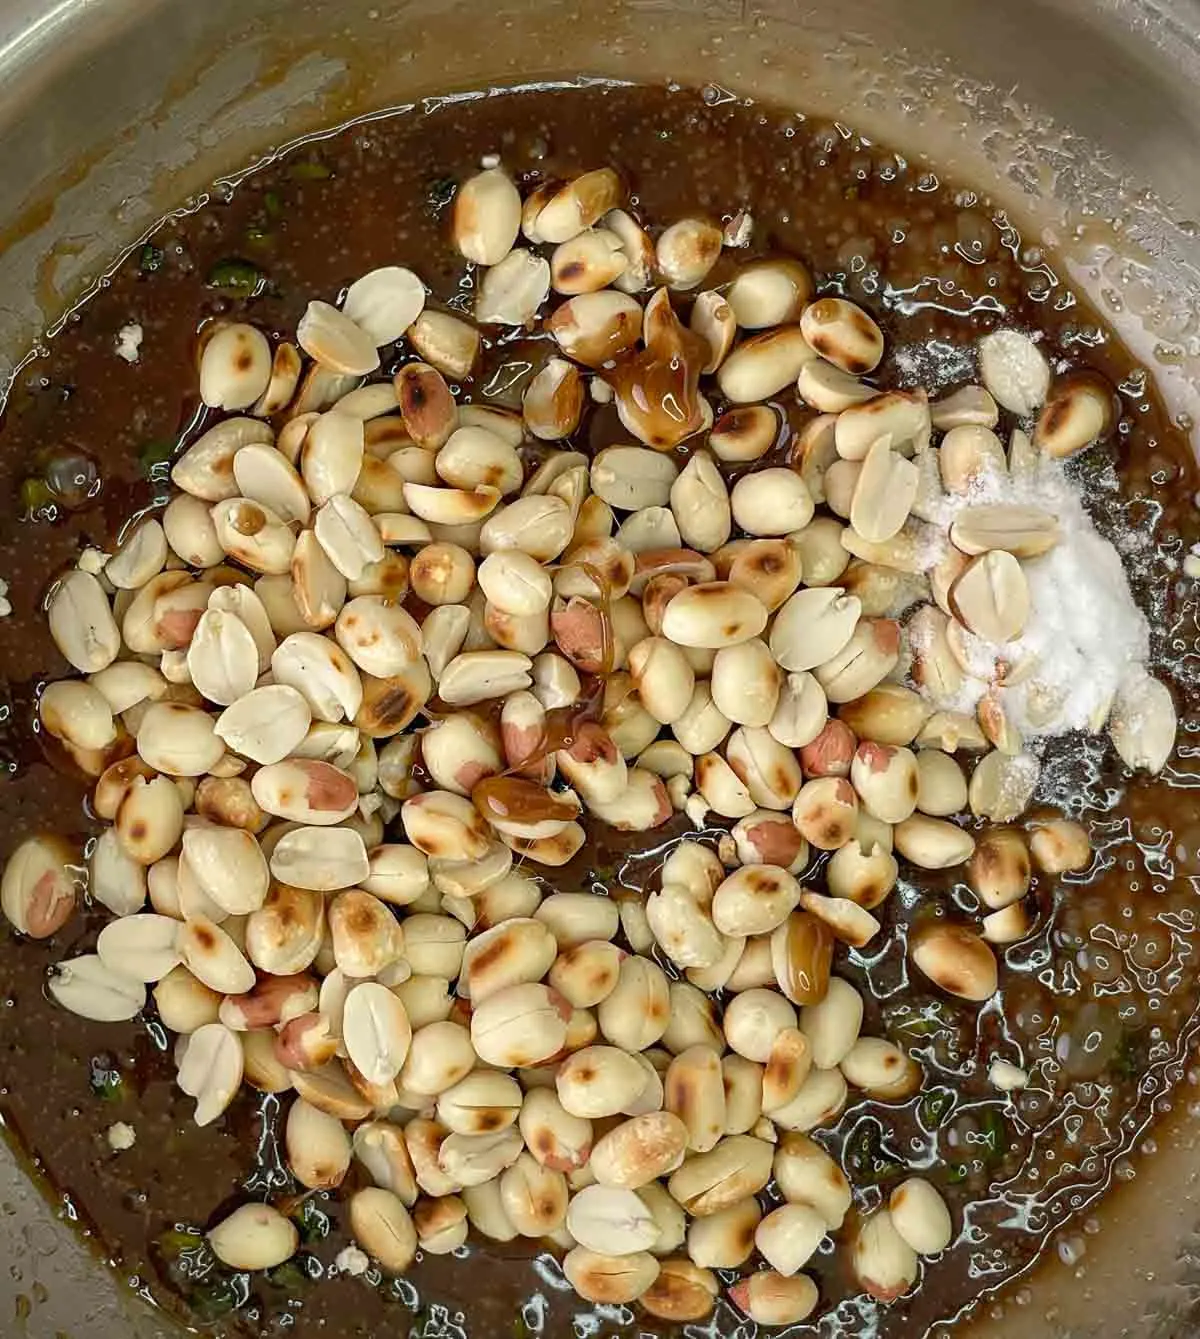 Adding peanuts to melted sugar